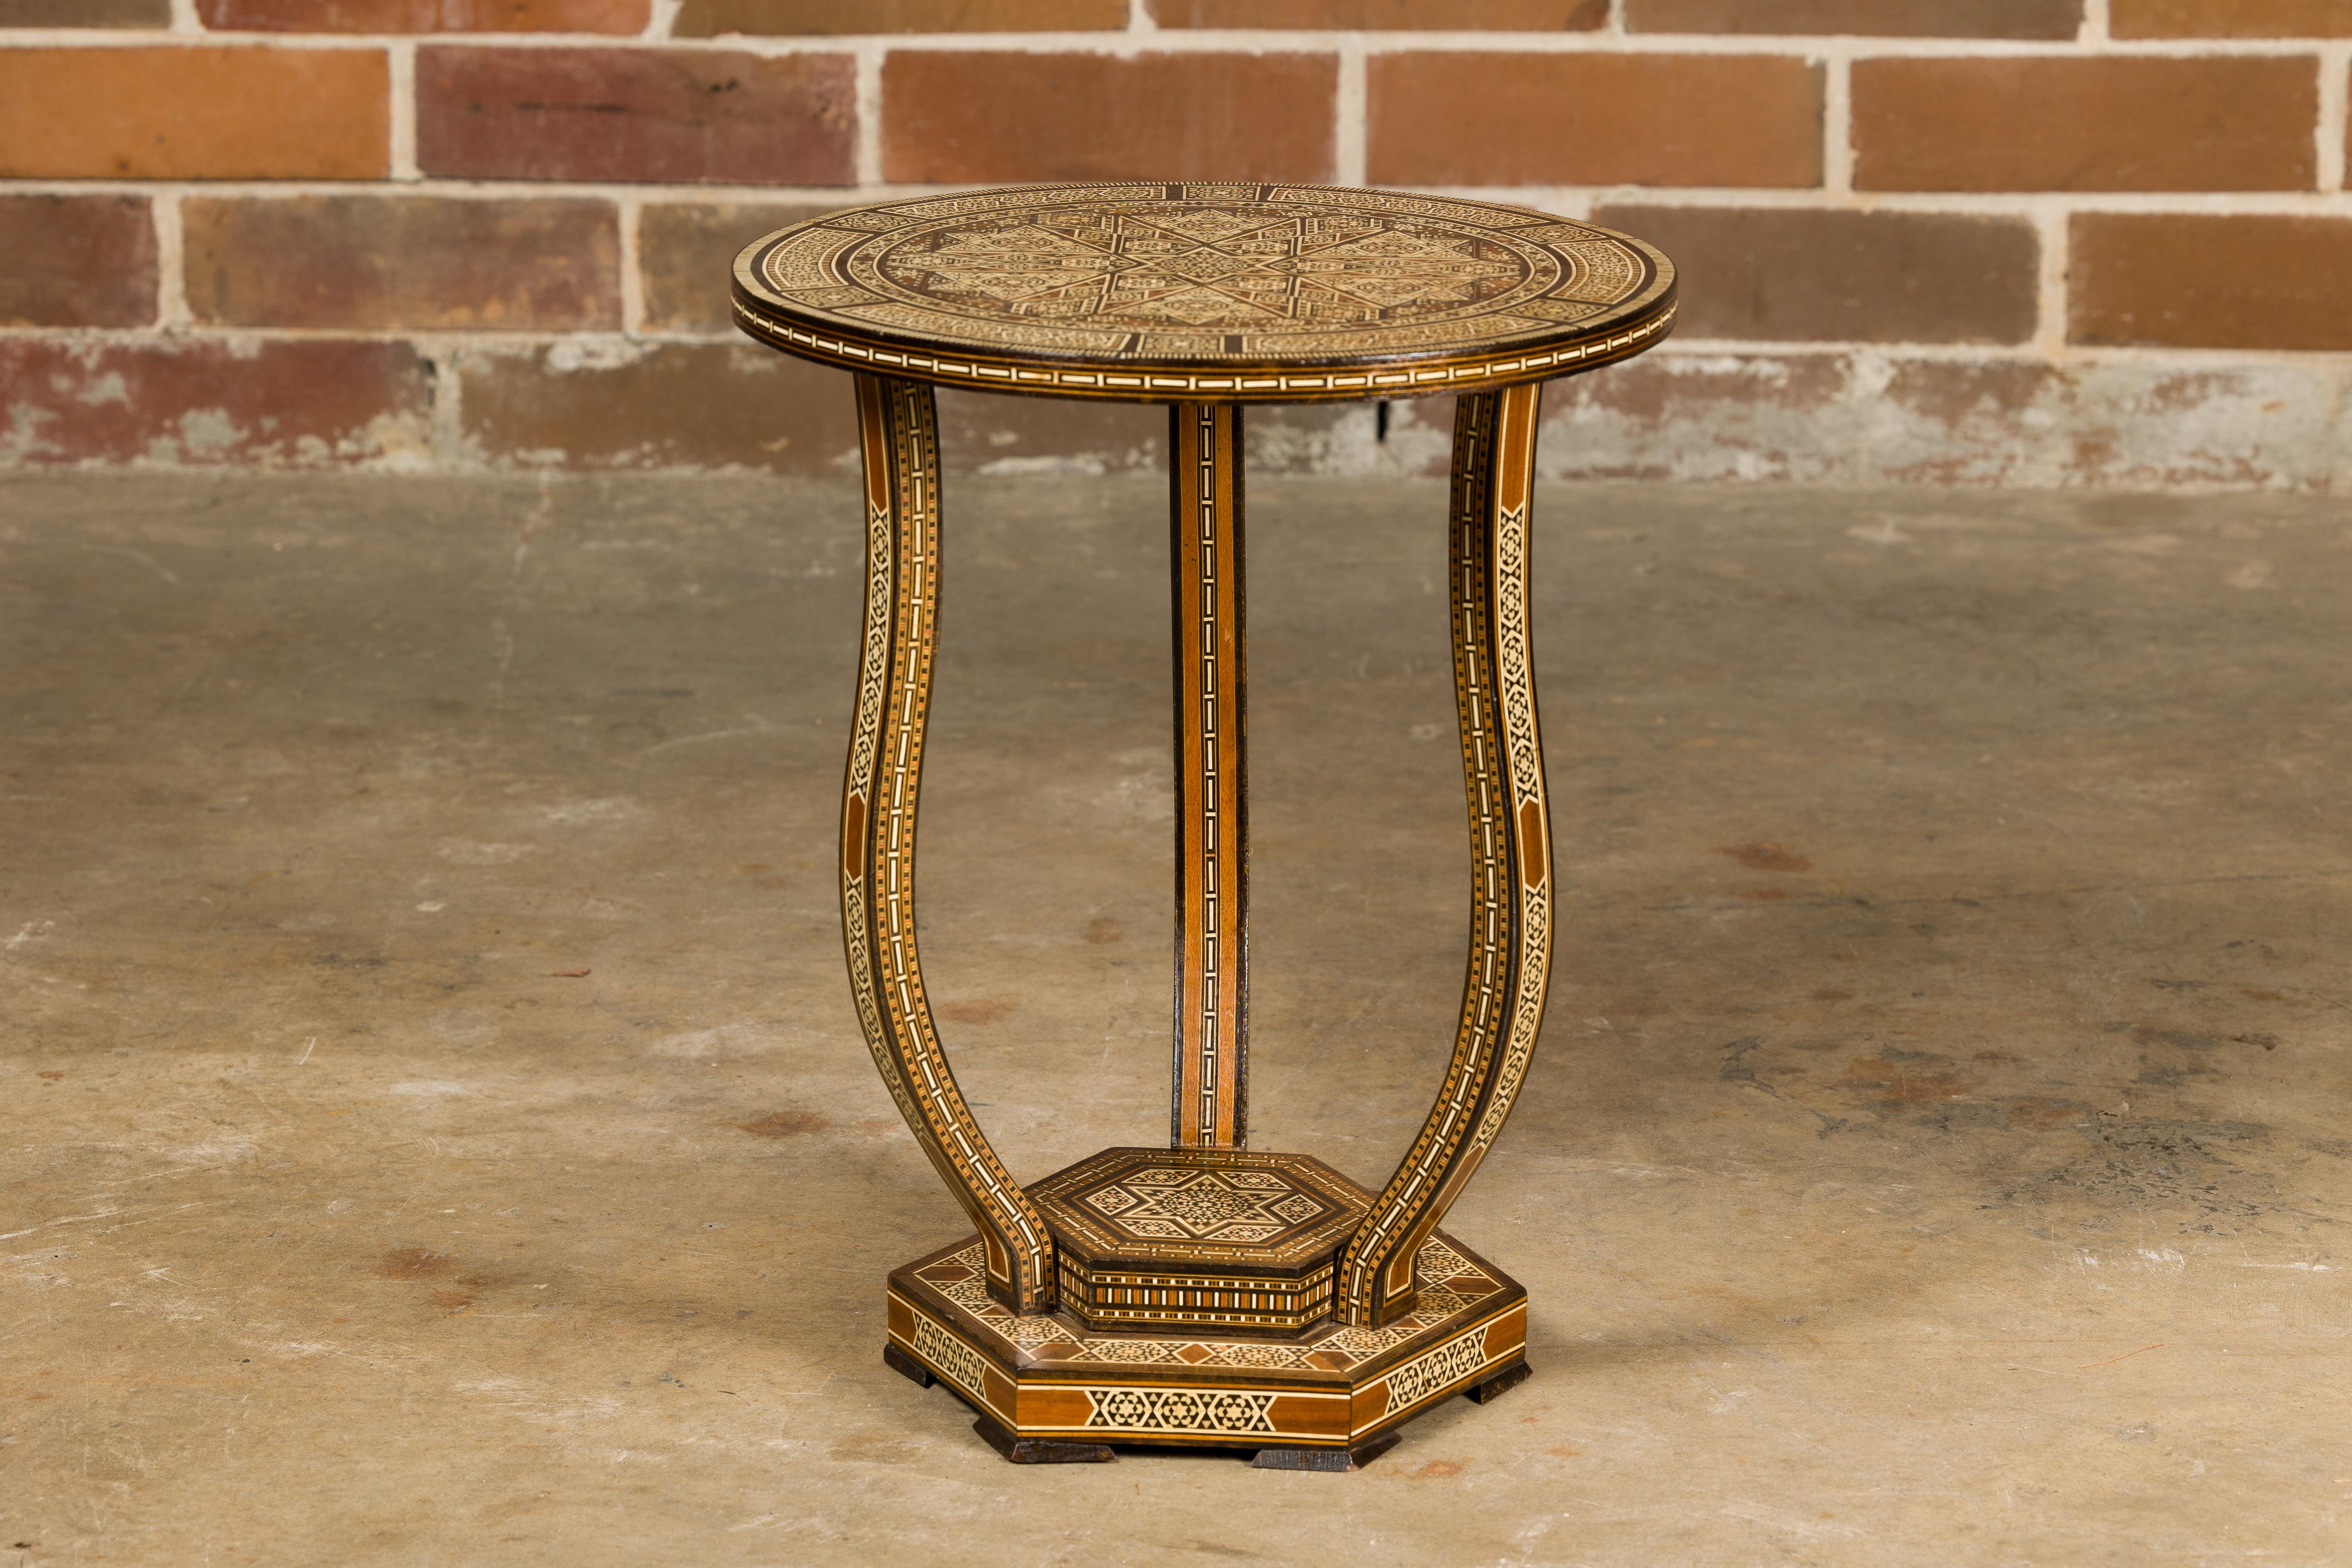 A Moorish style Moroccan drinks table from circa 1900 with circular top, abundant geometric bone inlay, three curving legs and stepped hexagonal base. This circa 1900 Moorish-style Moroccan drinks table embodies the opulence and intricate artistry